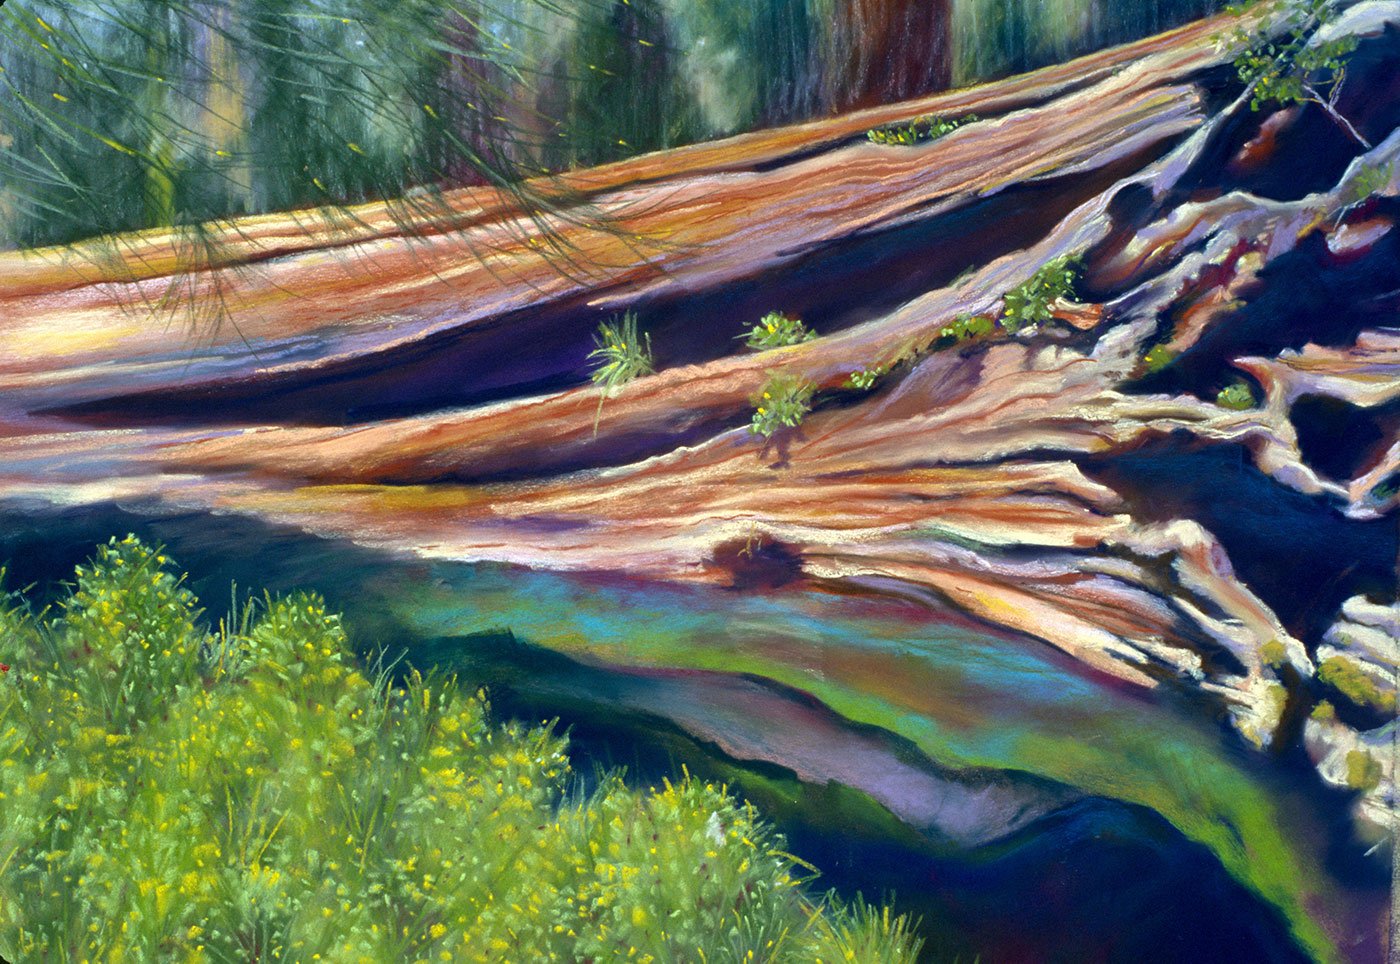 Pastel drawing of a fallen redwood tree sprouting seedlings from its trunk, which lays partially submerged in water.